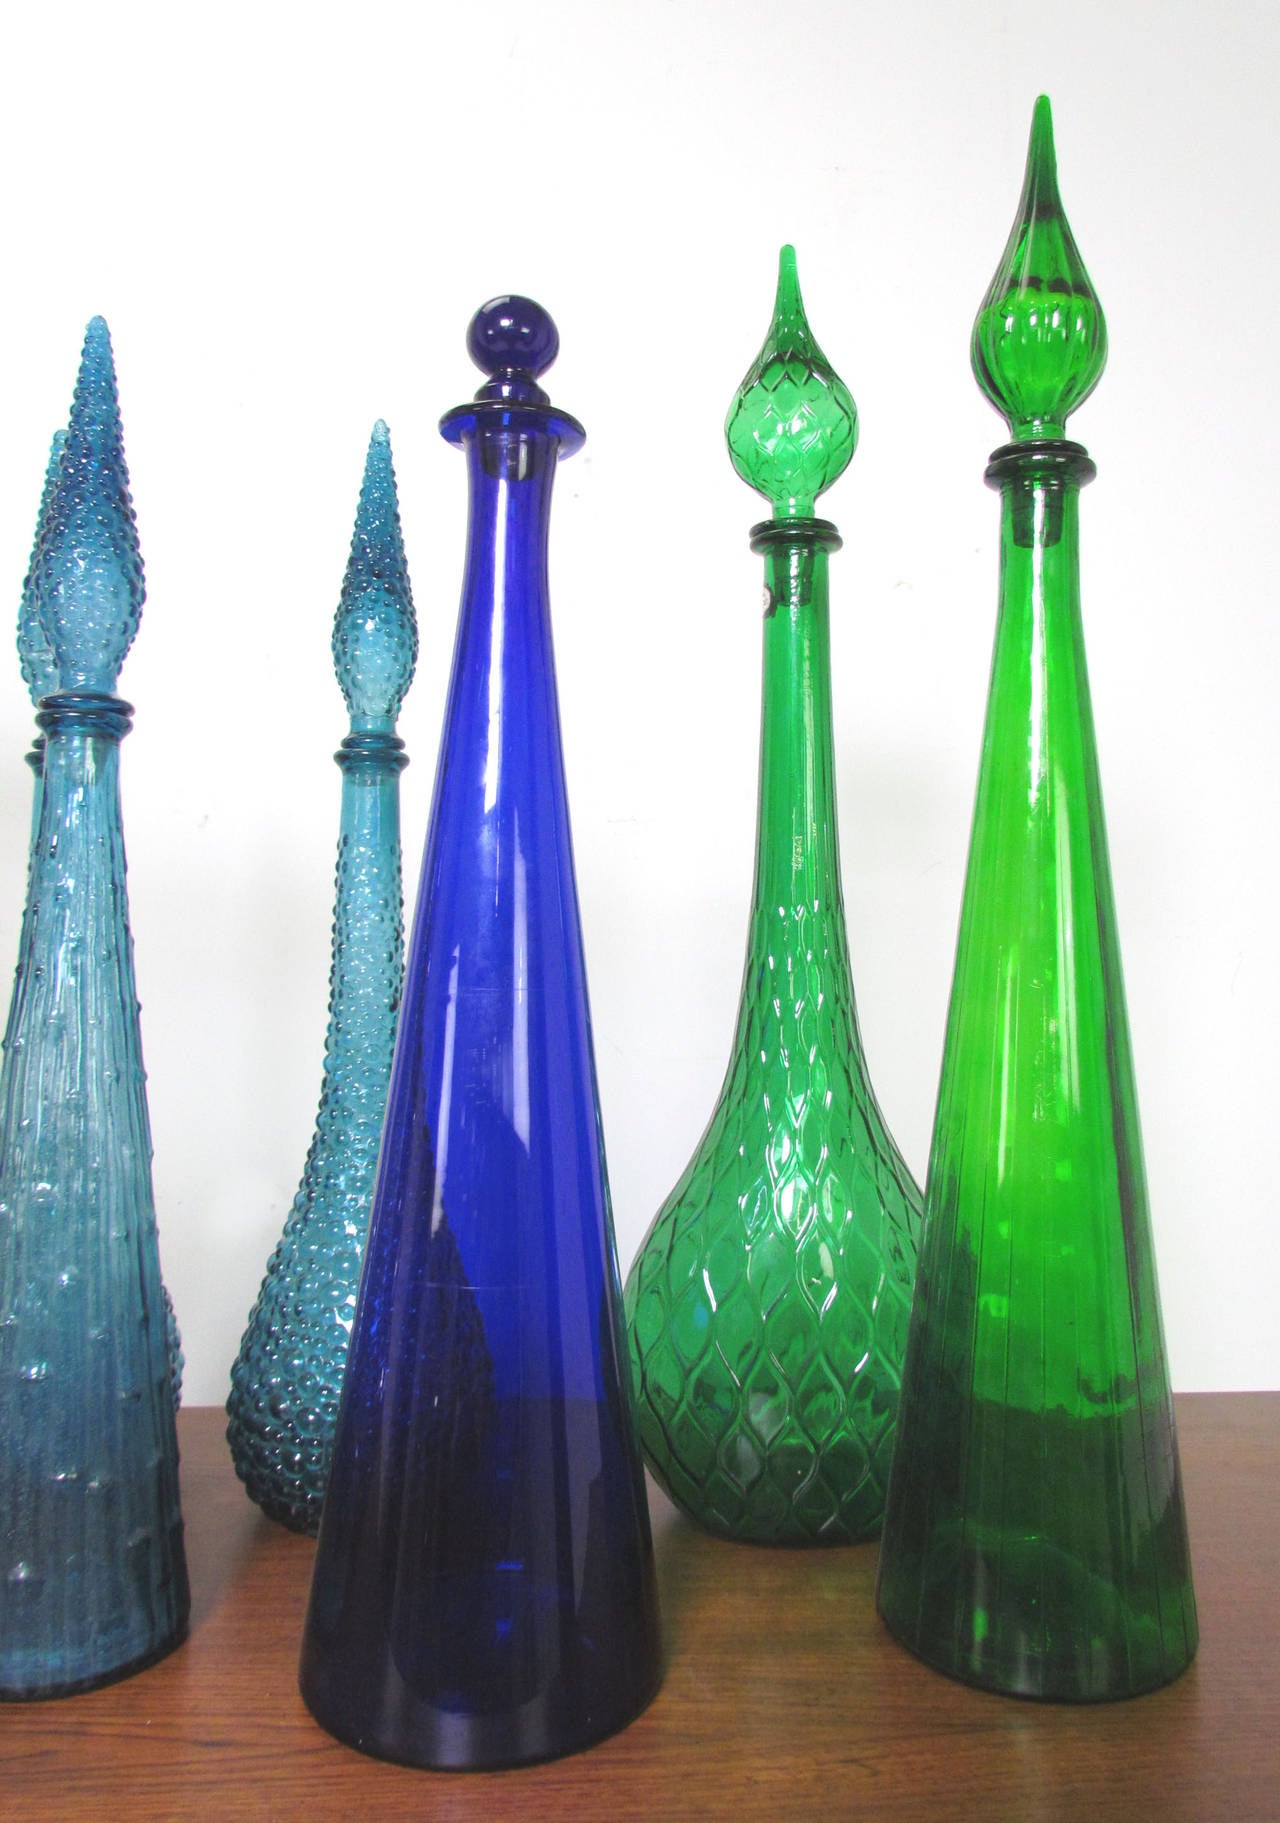 American Large Collection of Mid-Century Modern Glass Genie Decanter Bottles